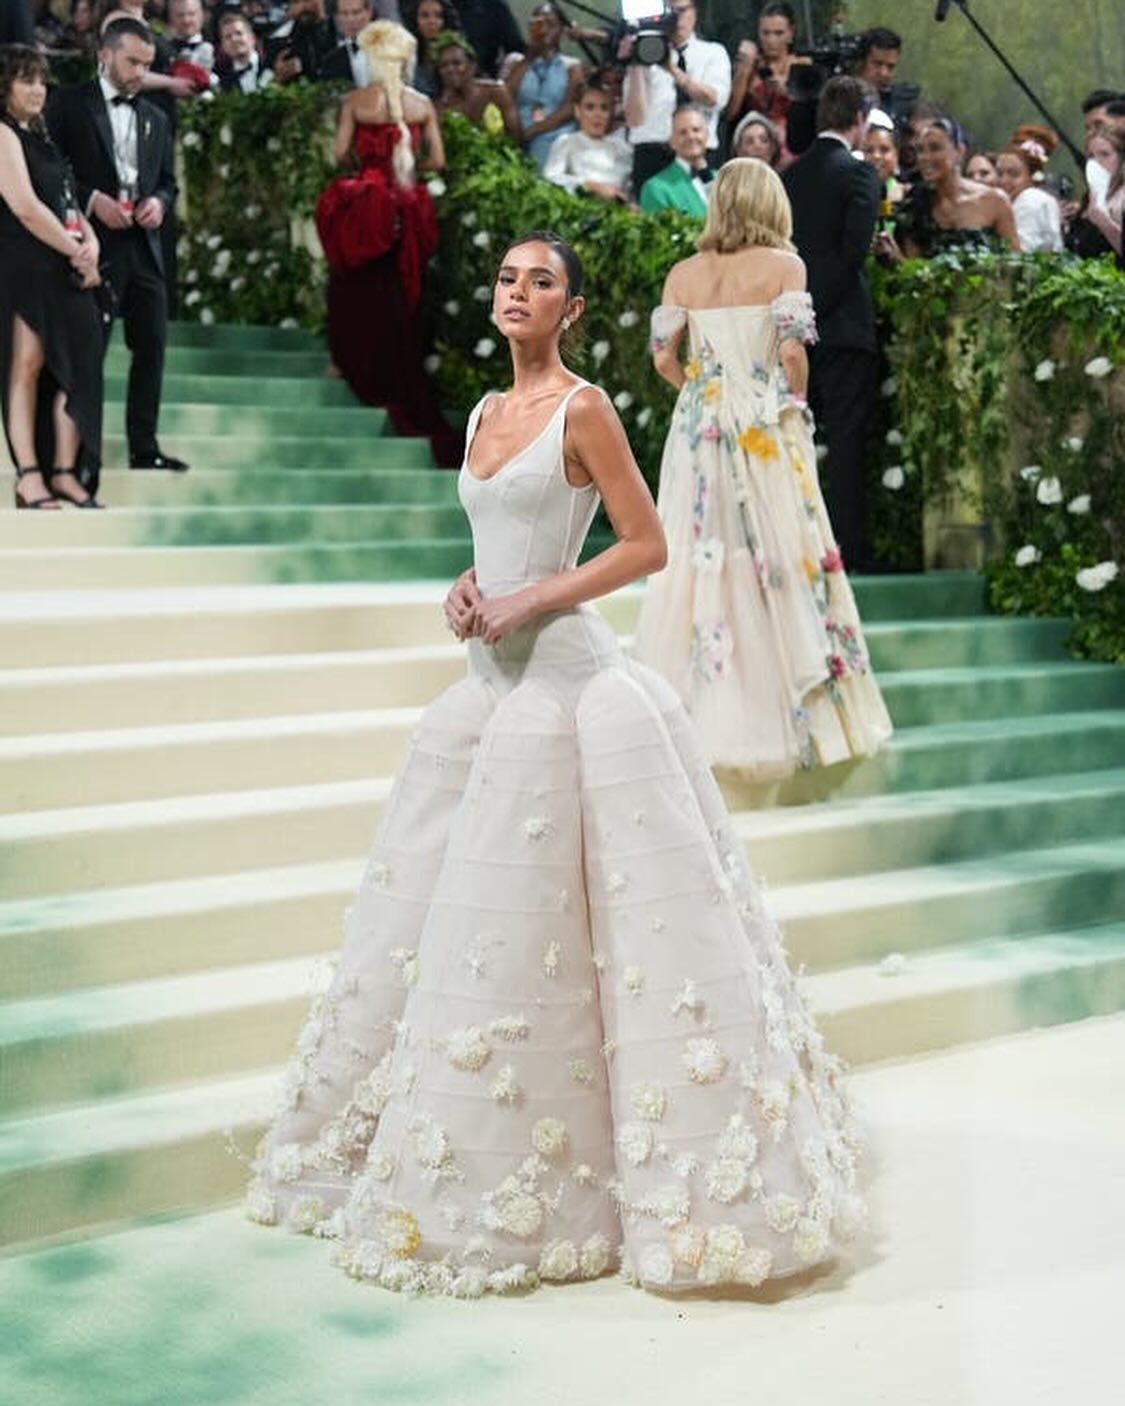 Some of our favorite bridal vibe looks from the MET Gala 🤩✨ Which one is your favorite? We ended with a colorful surprise at the end! 💕

📸 from @nytimes